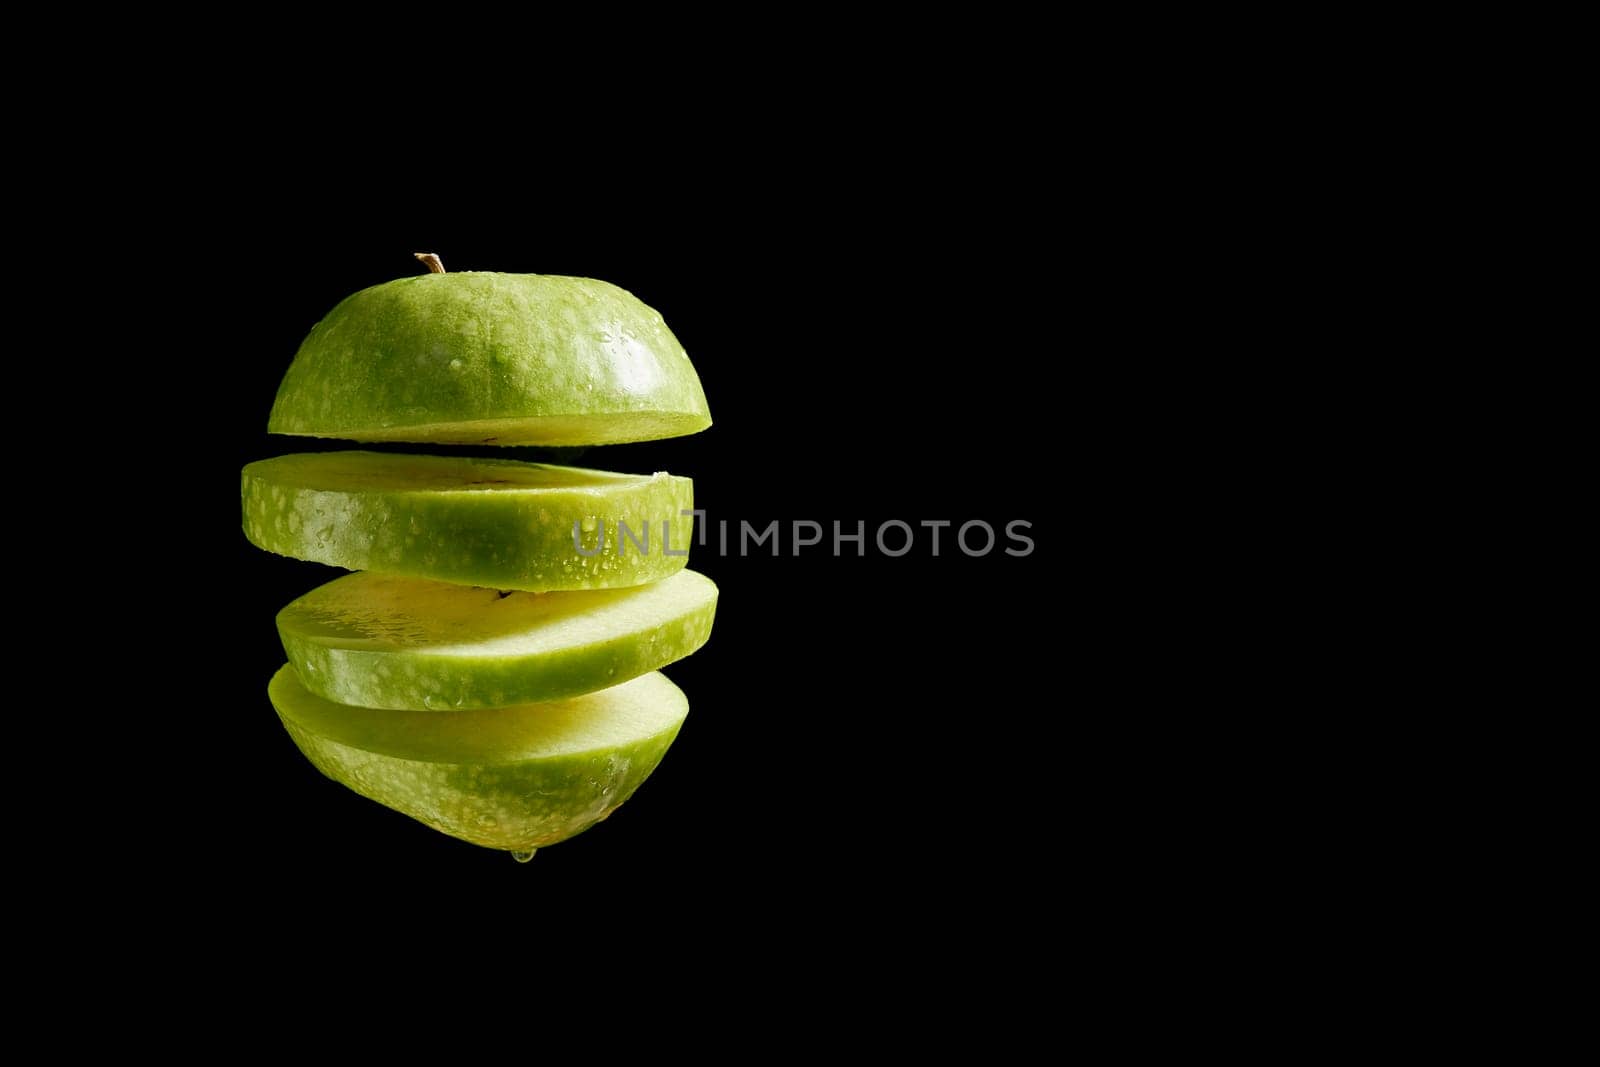 Close up of sliced green organic fresh apple with water droplets over black background